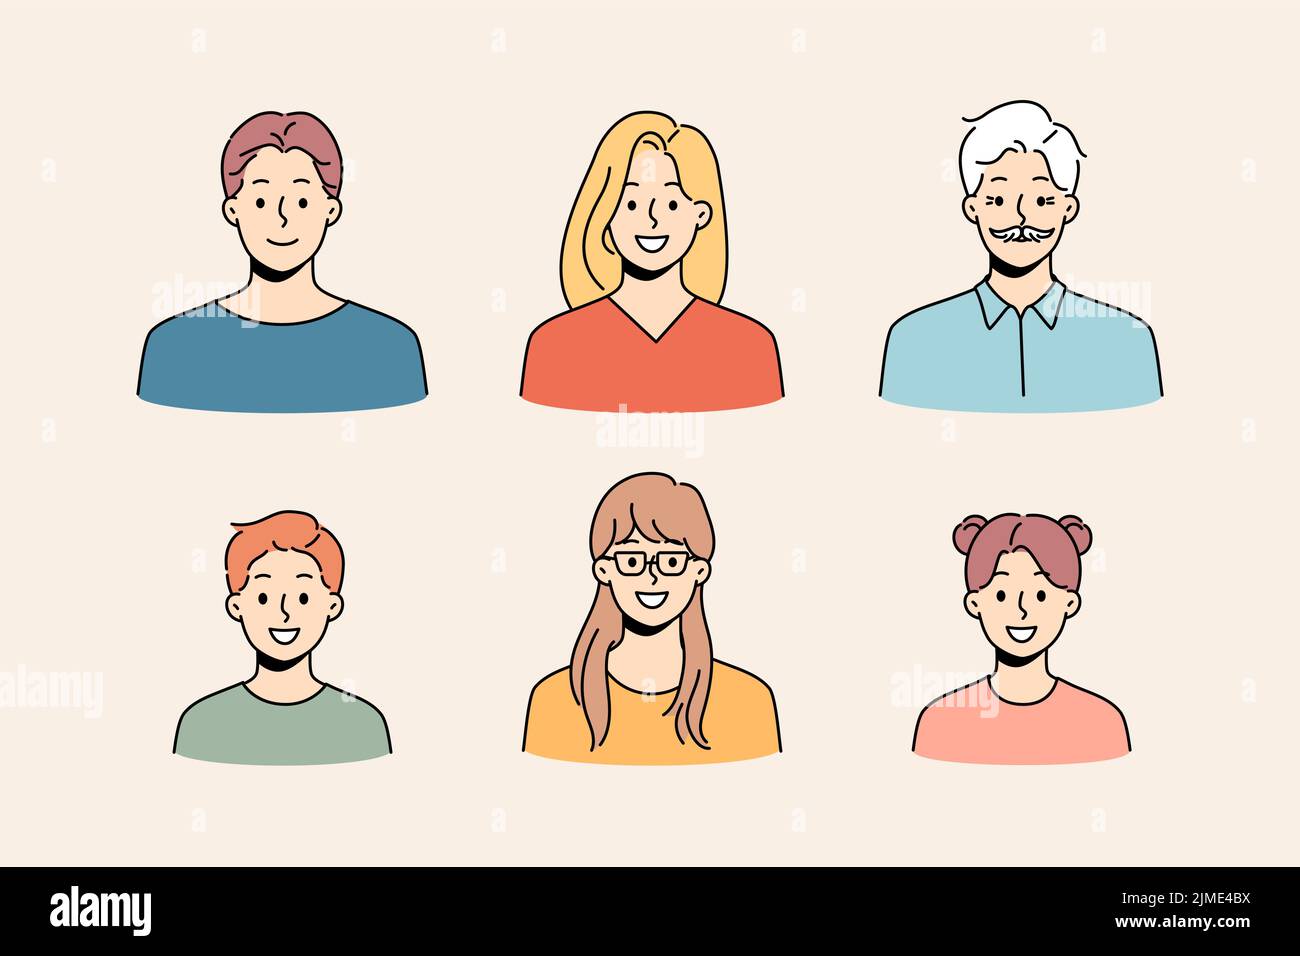 Avatars of diverse people set. Collection of younger and older person faces. Diversity and equality. Vector illustration.  Stock Vector